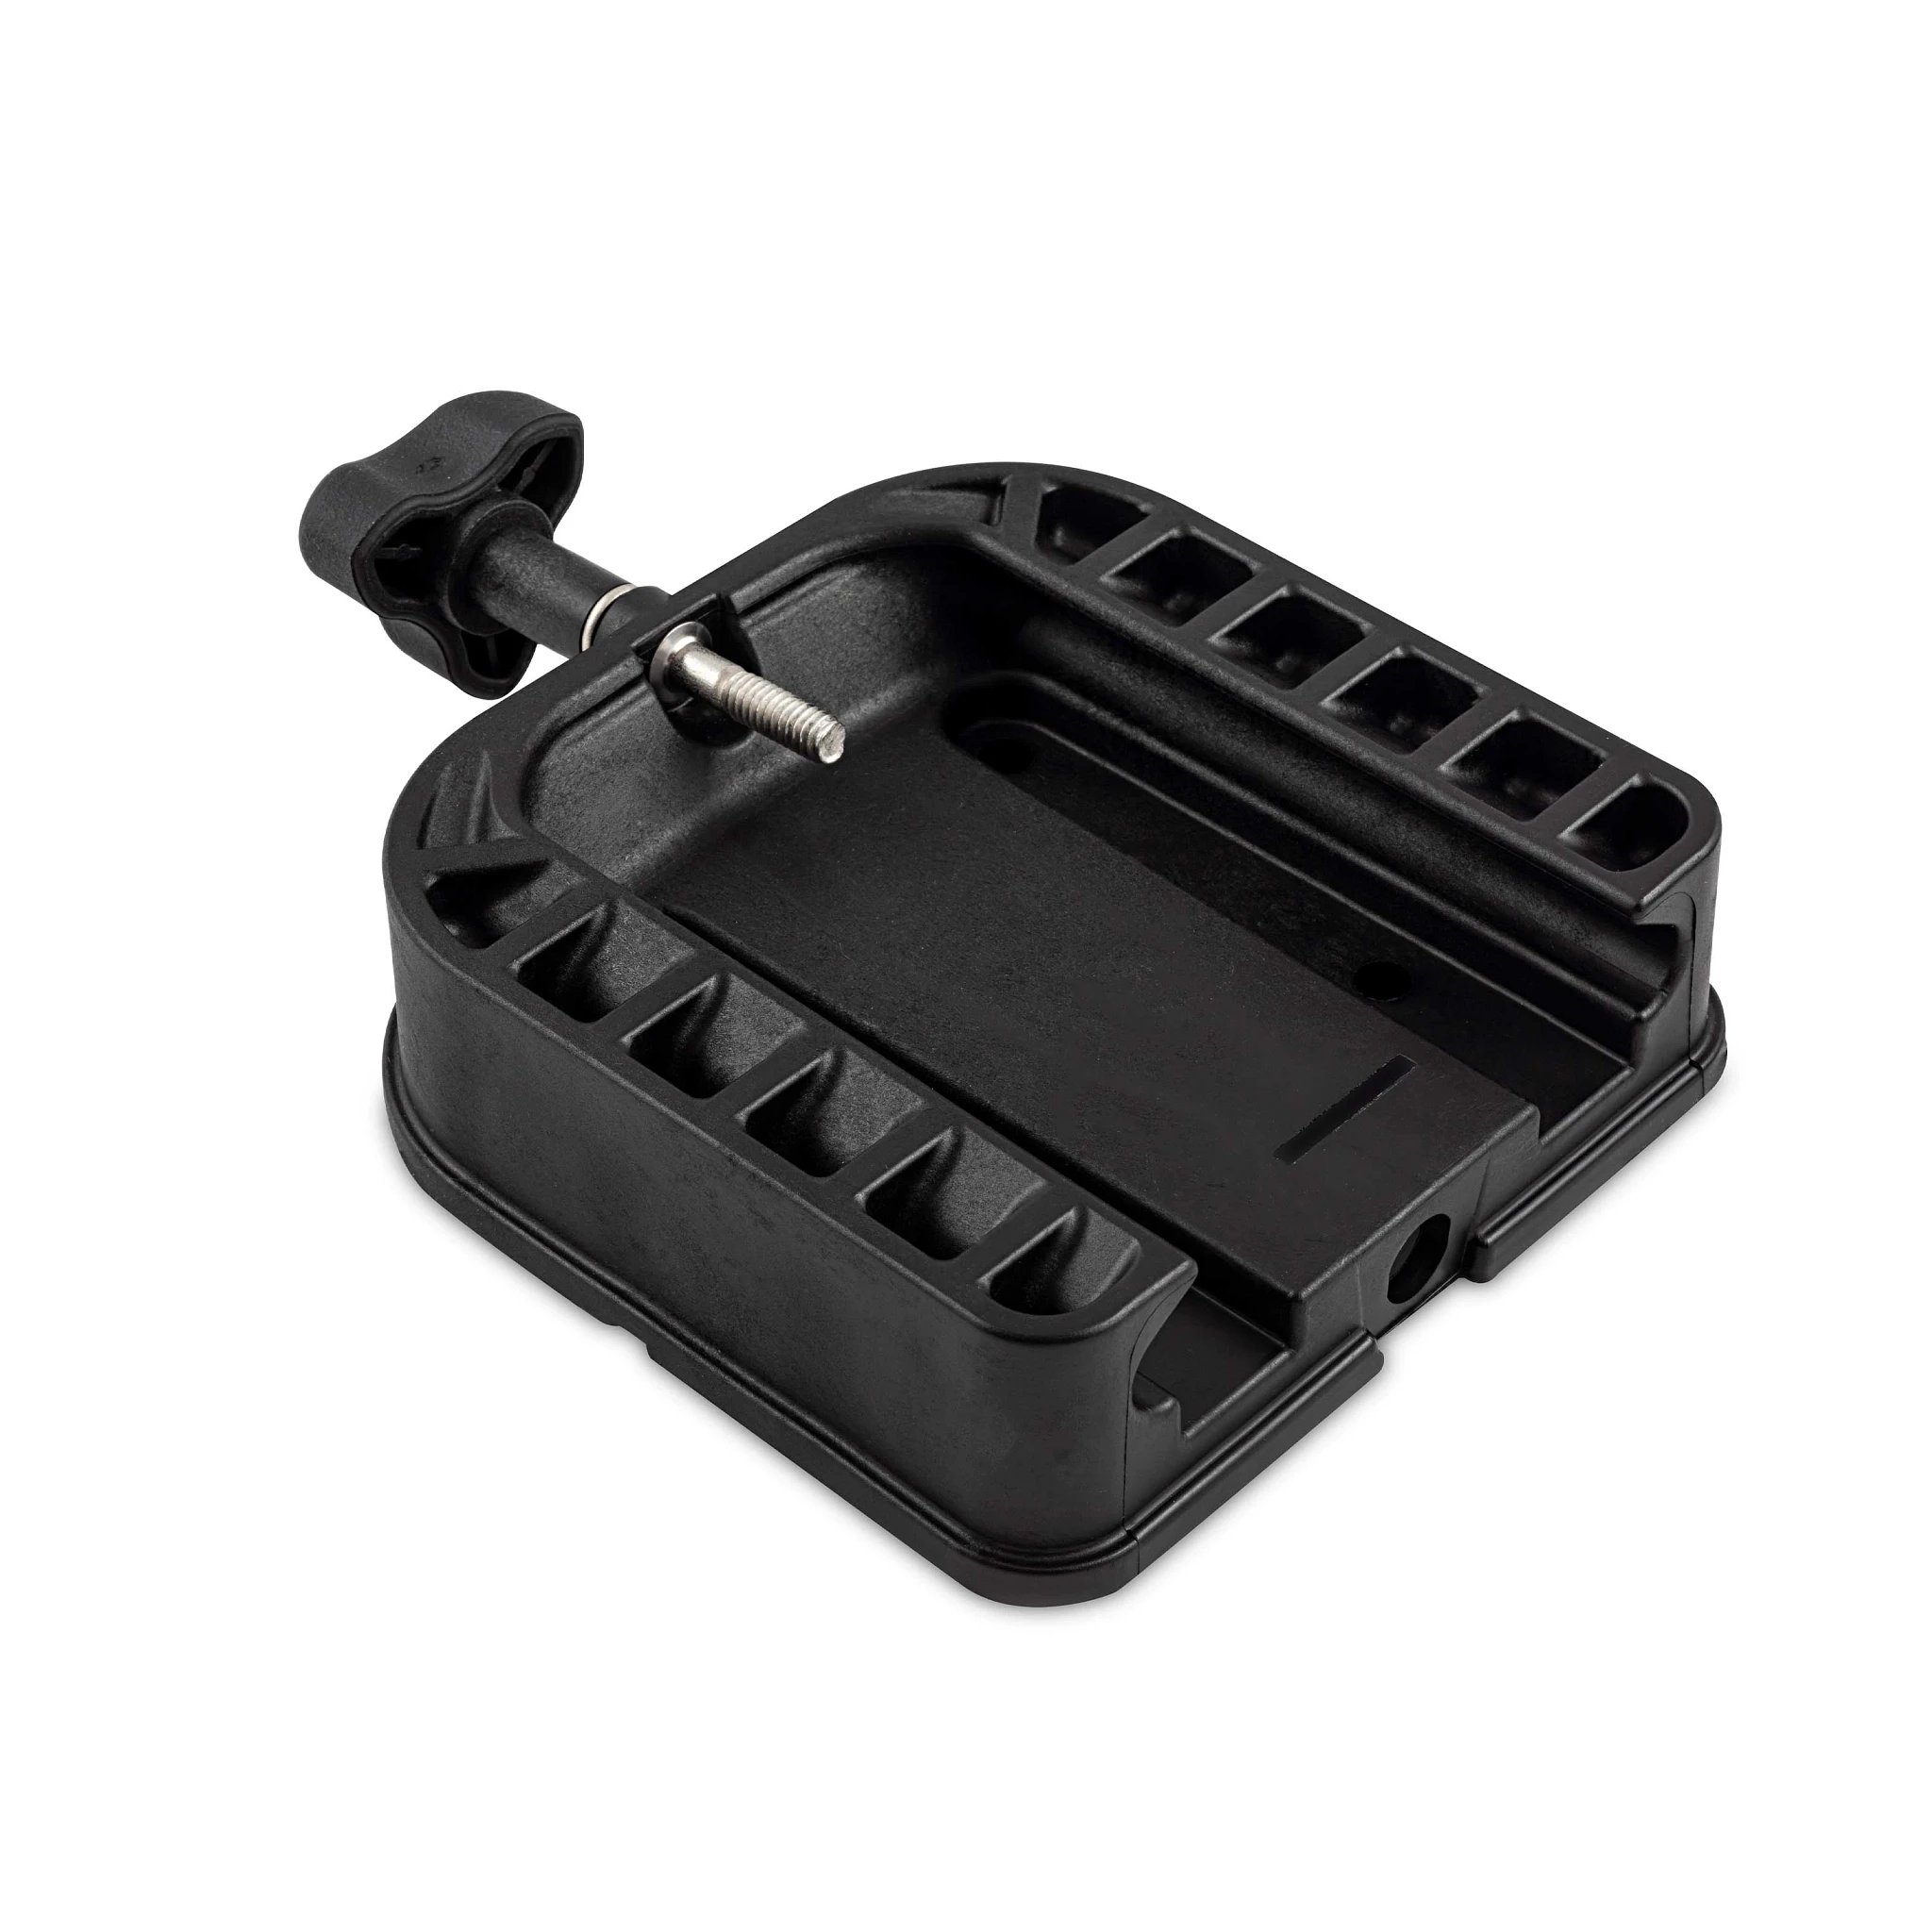 Black composite mounting base with adjustable tension knob